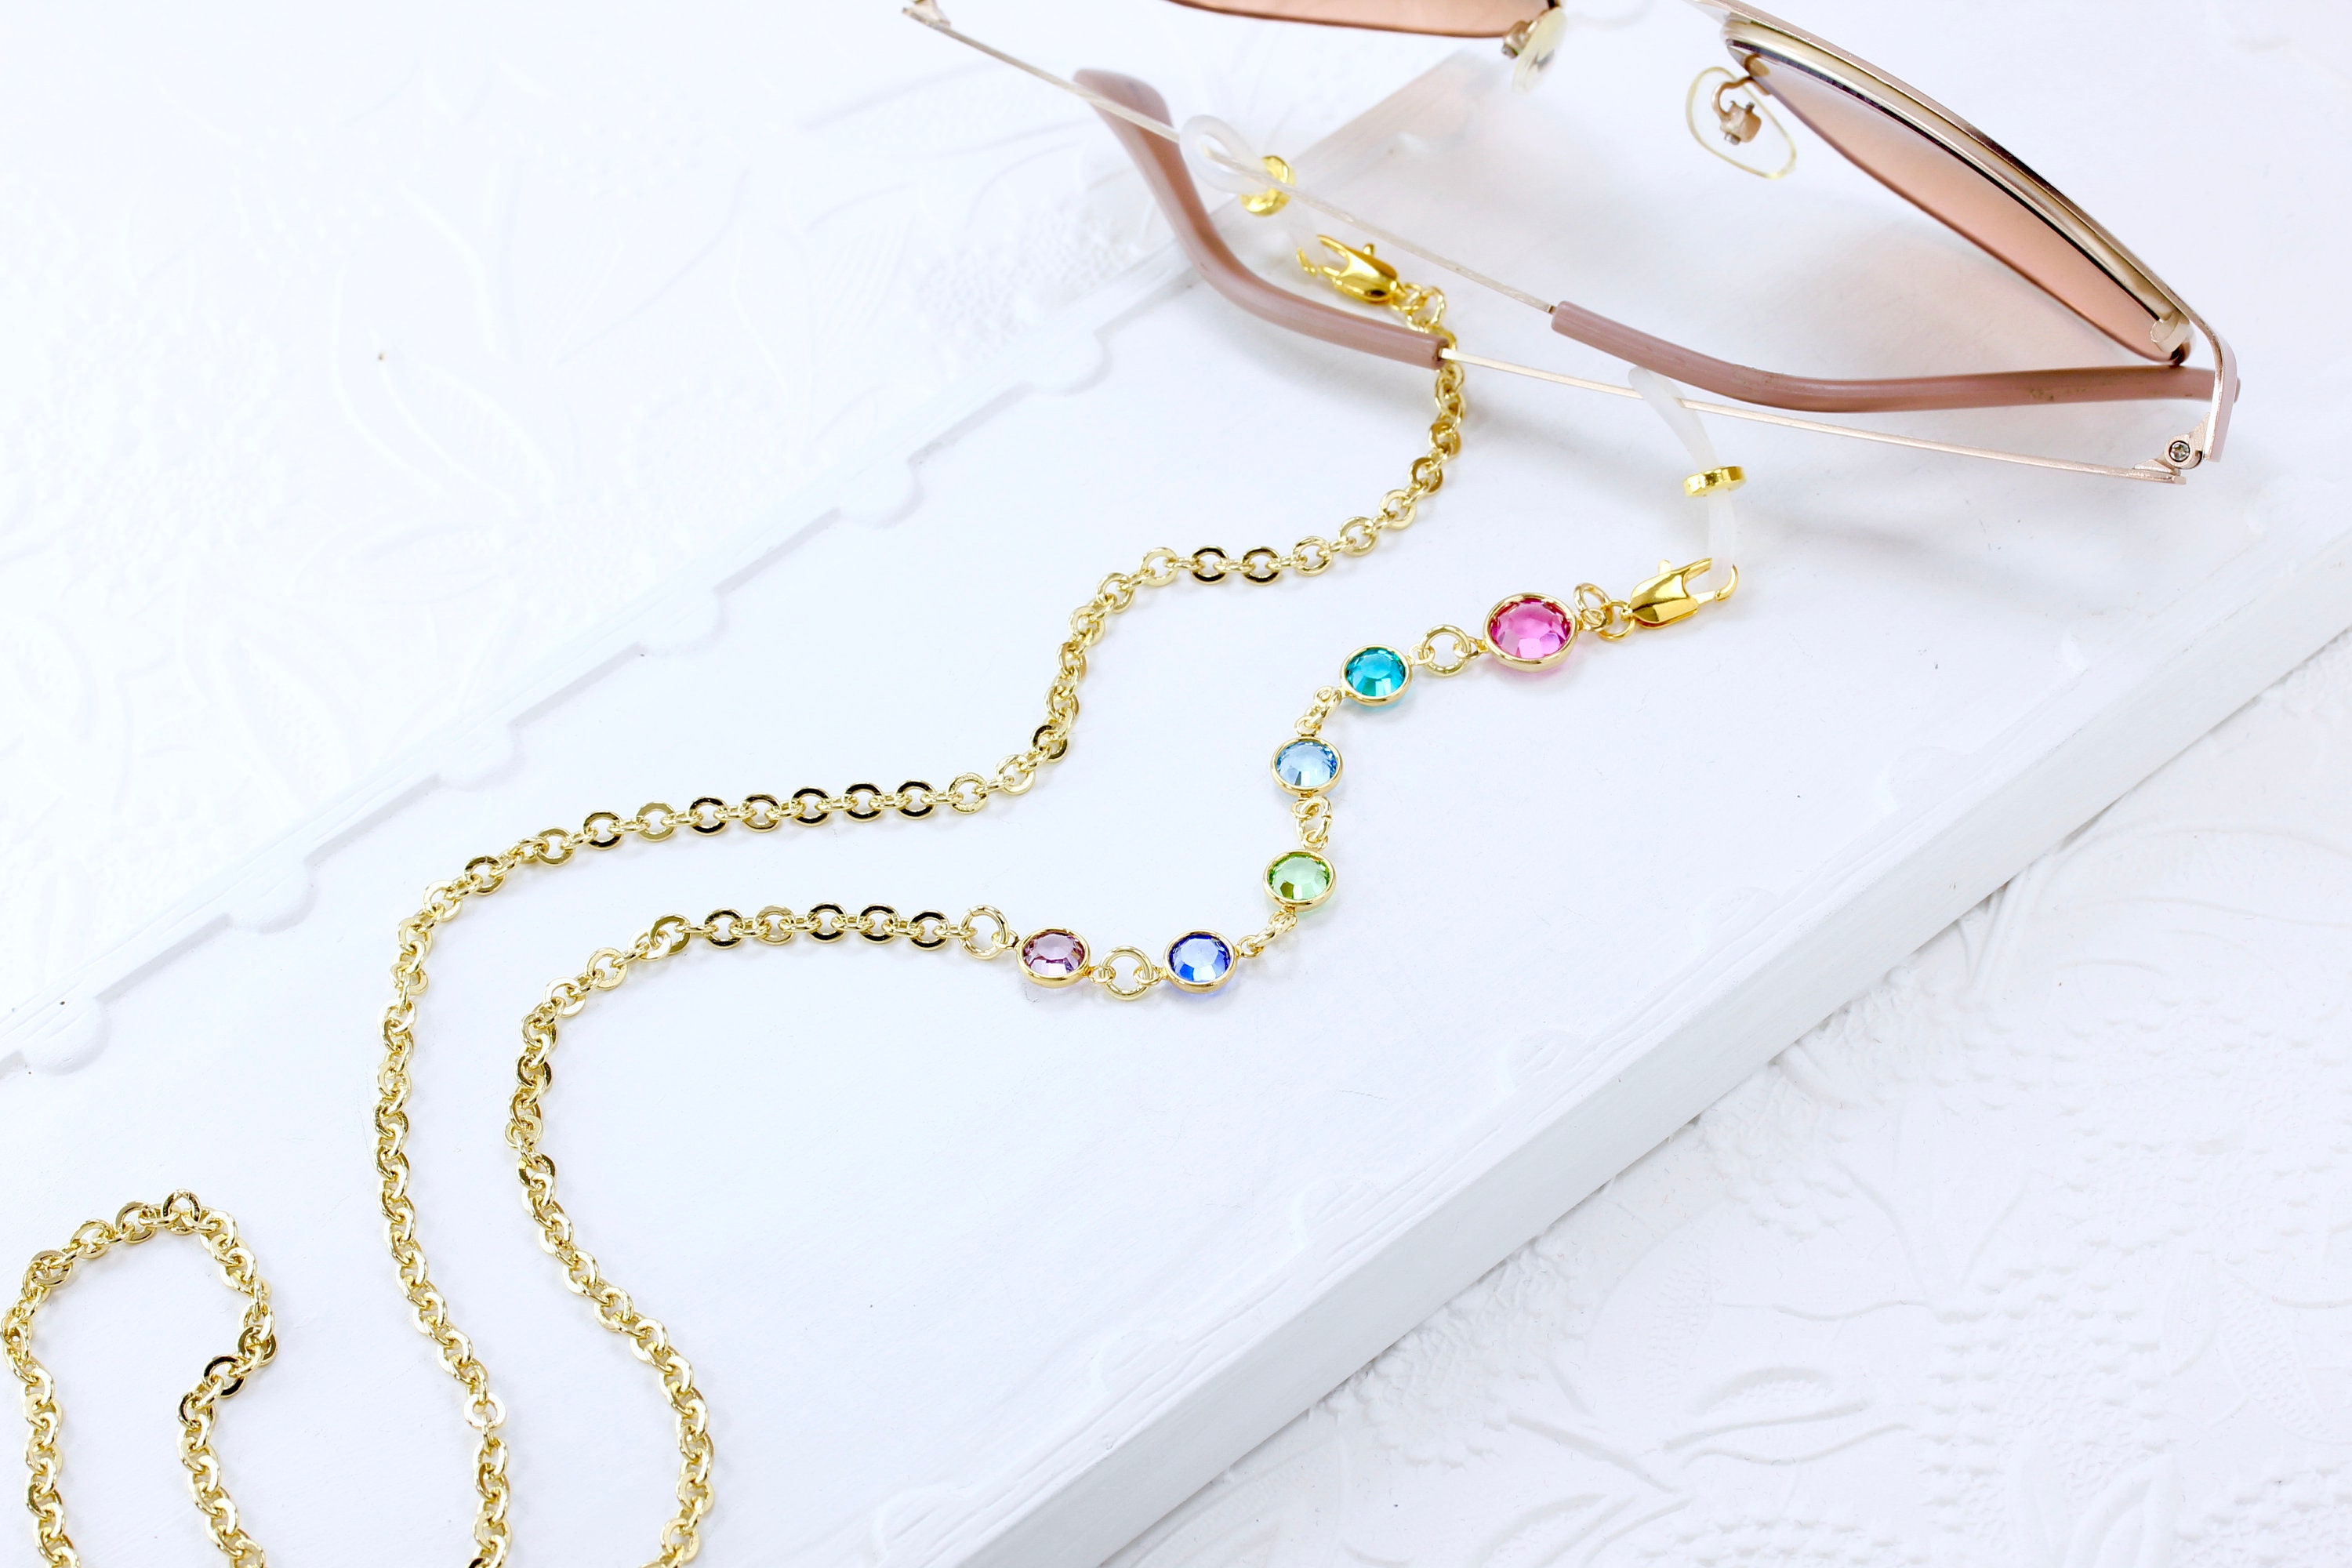 Swarovski Birthstone Eyeglass Chains, Reading Glasses Chain, Gold  Sunglasses Holder Necklace, Gifts for Grandmothers, High Quality Eyeglass 